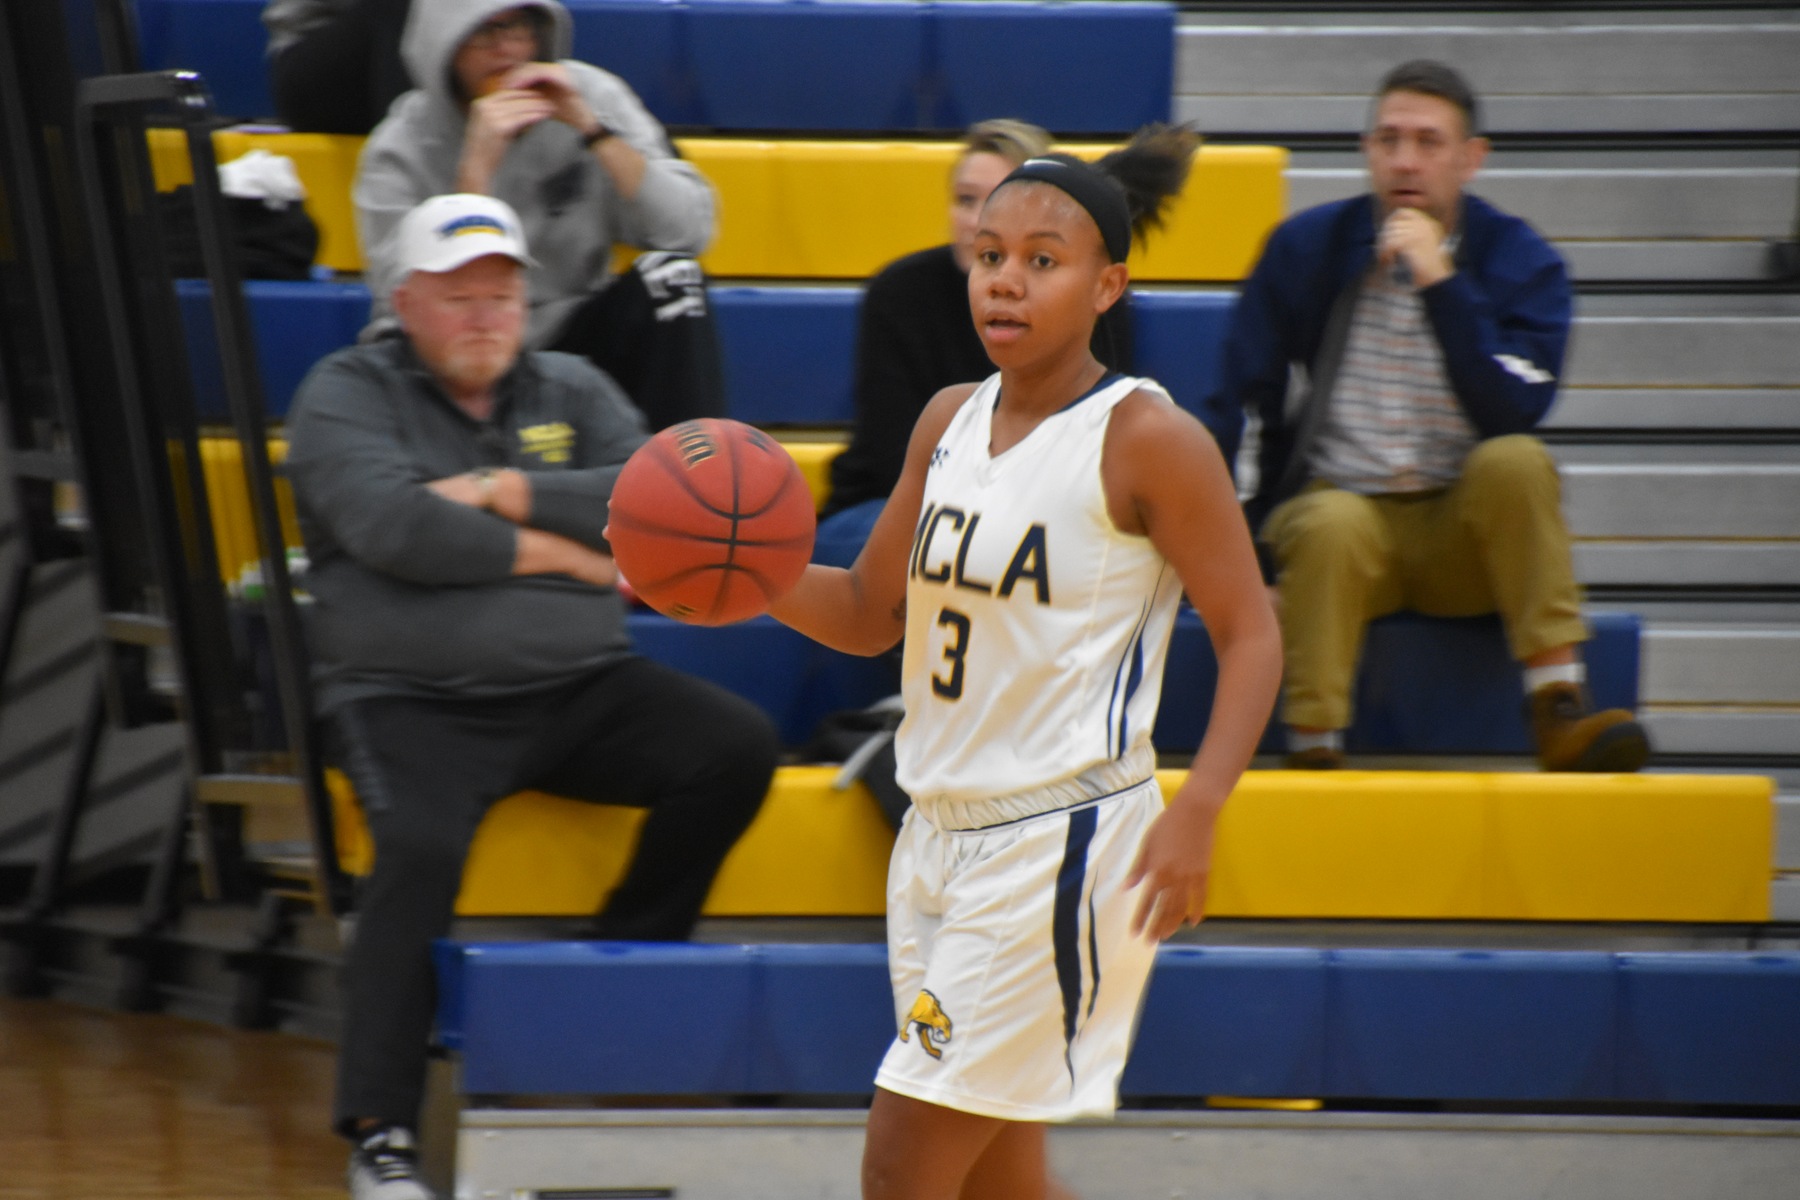 Women's Basketball falls to Curry 56-43 as they begin second half of season